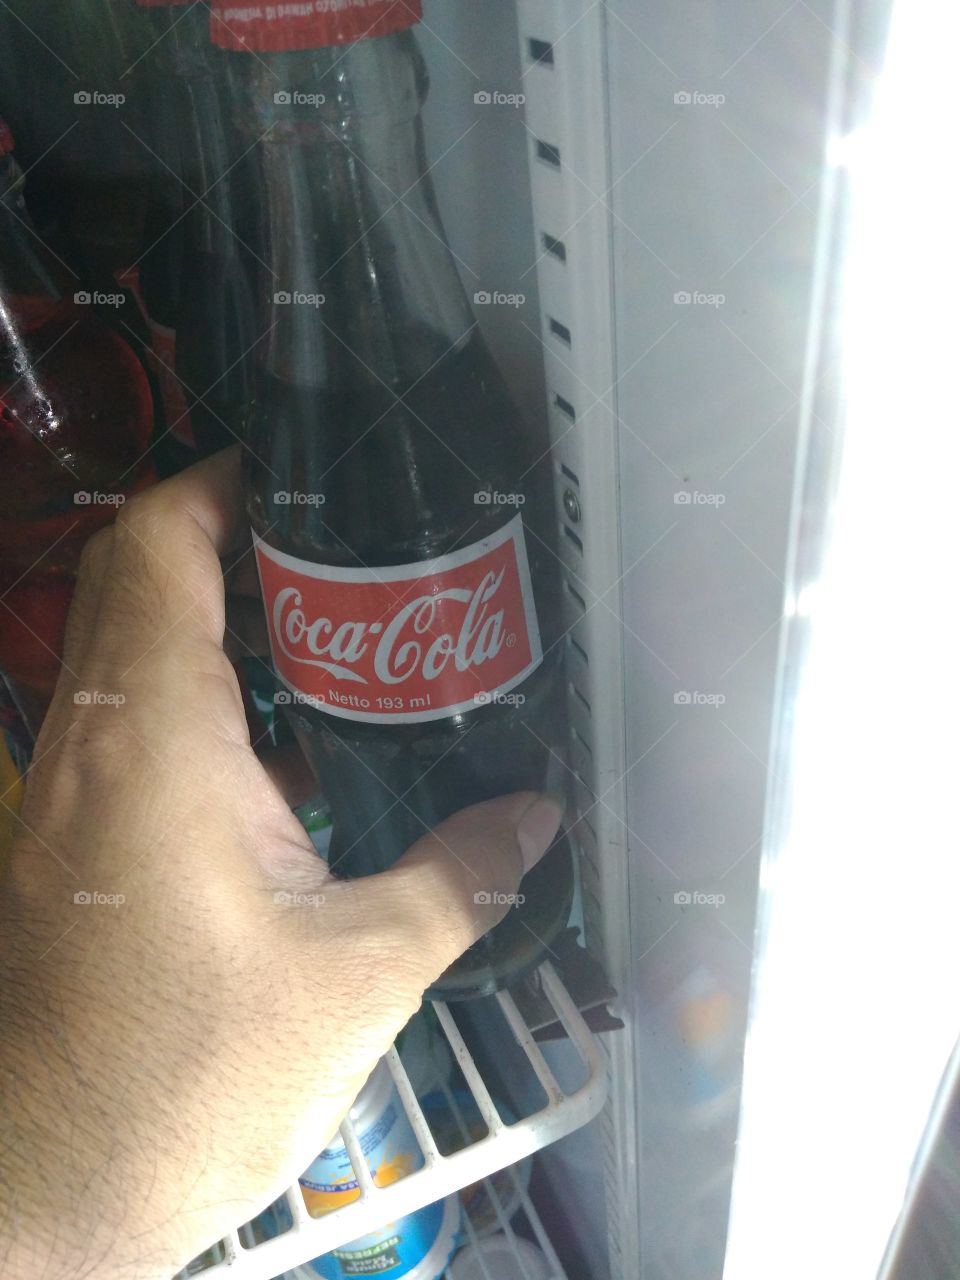 Time for coca cola